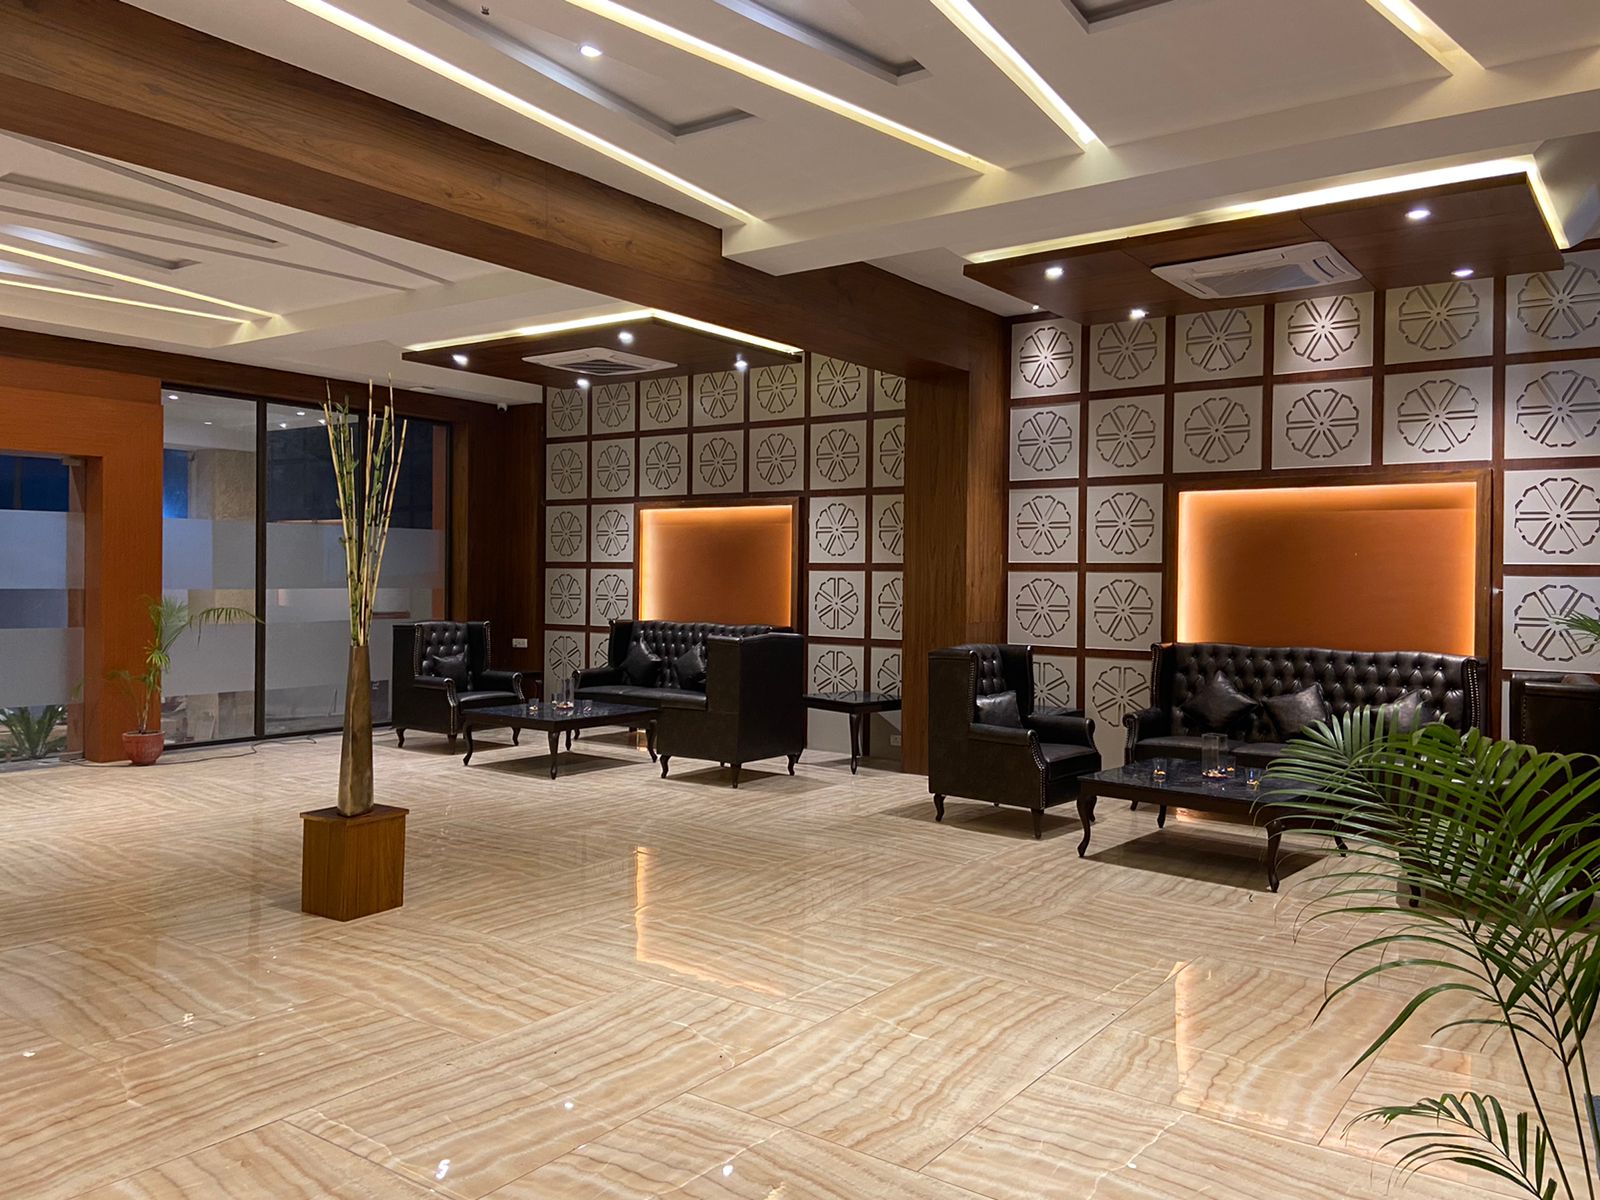 Suba Group of Hotels expands its footprint in Gujarat; opens  Click Hotel LH Seven in Morbi